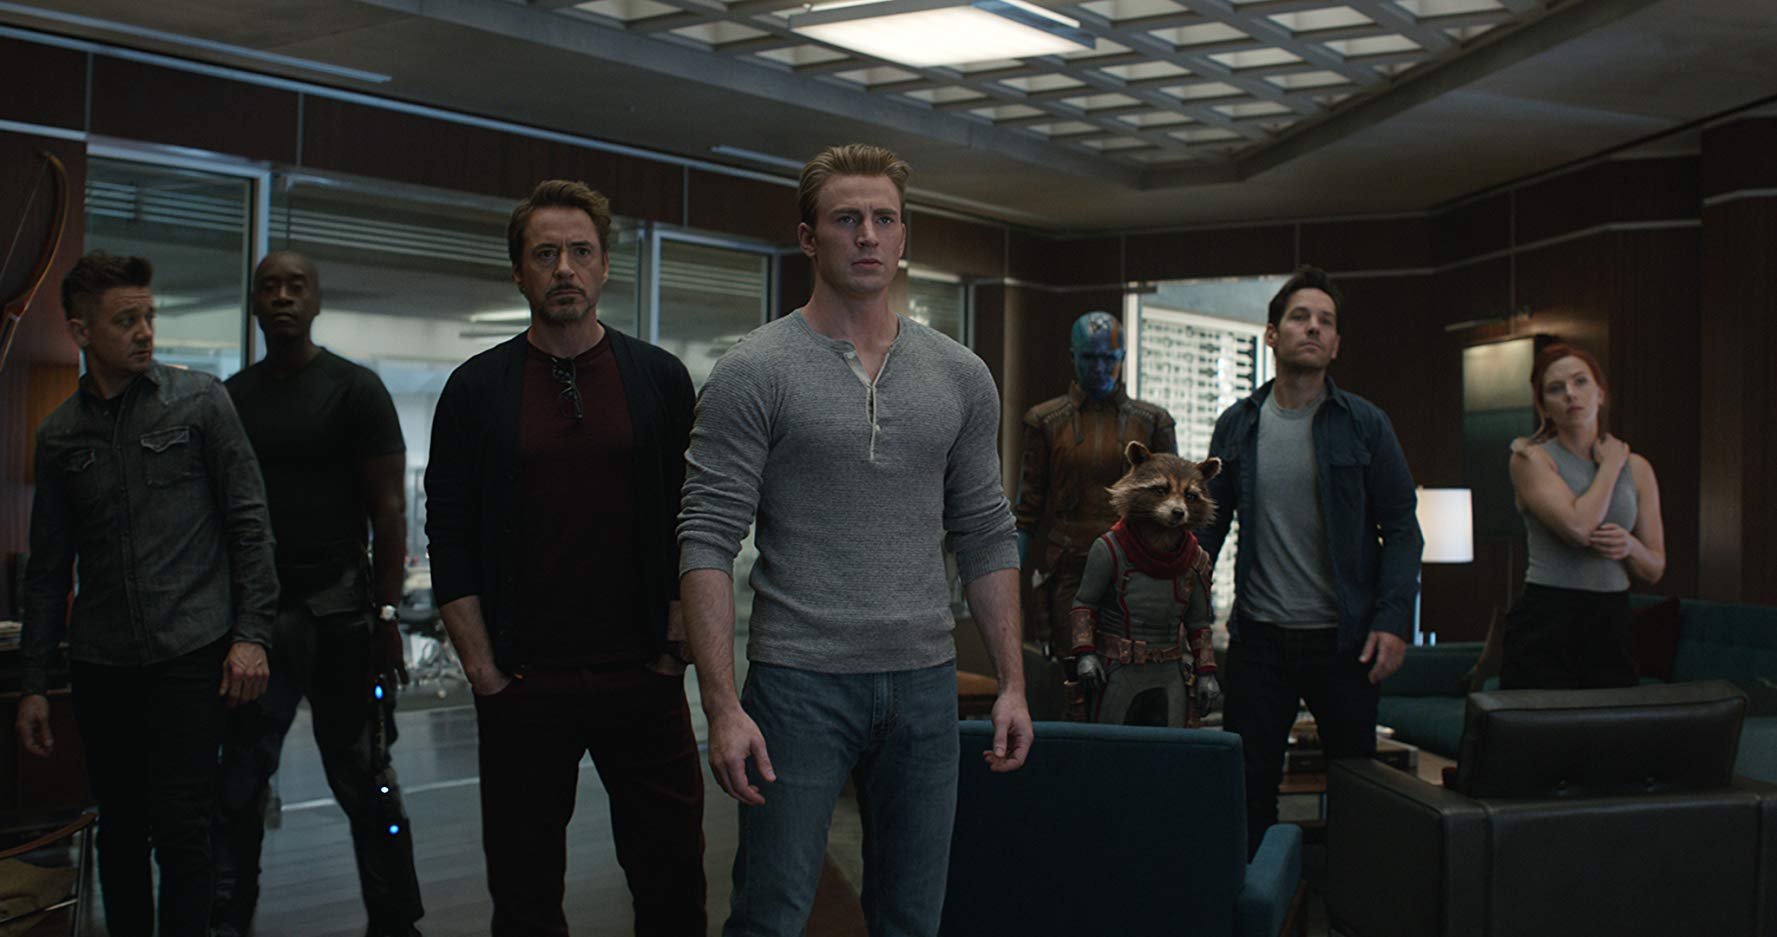 The Avengers in Civilian Attire focus in to plan for what's ahead.